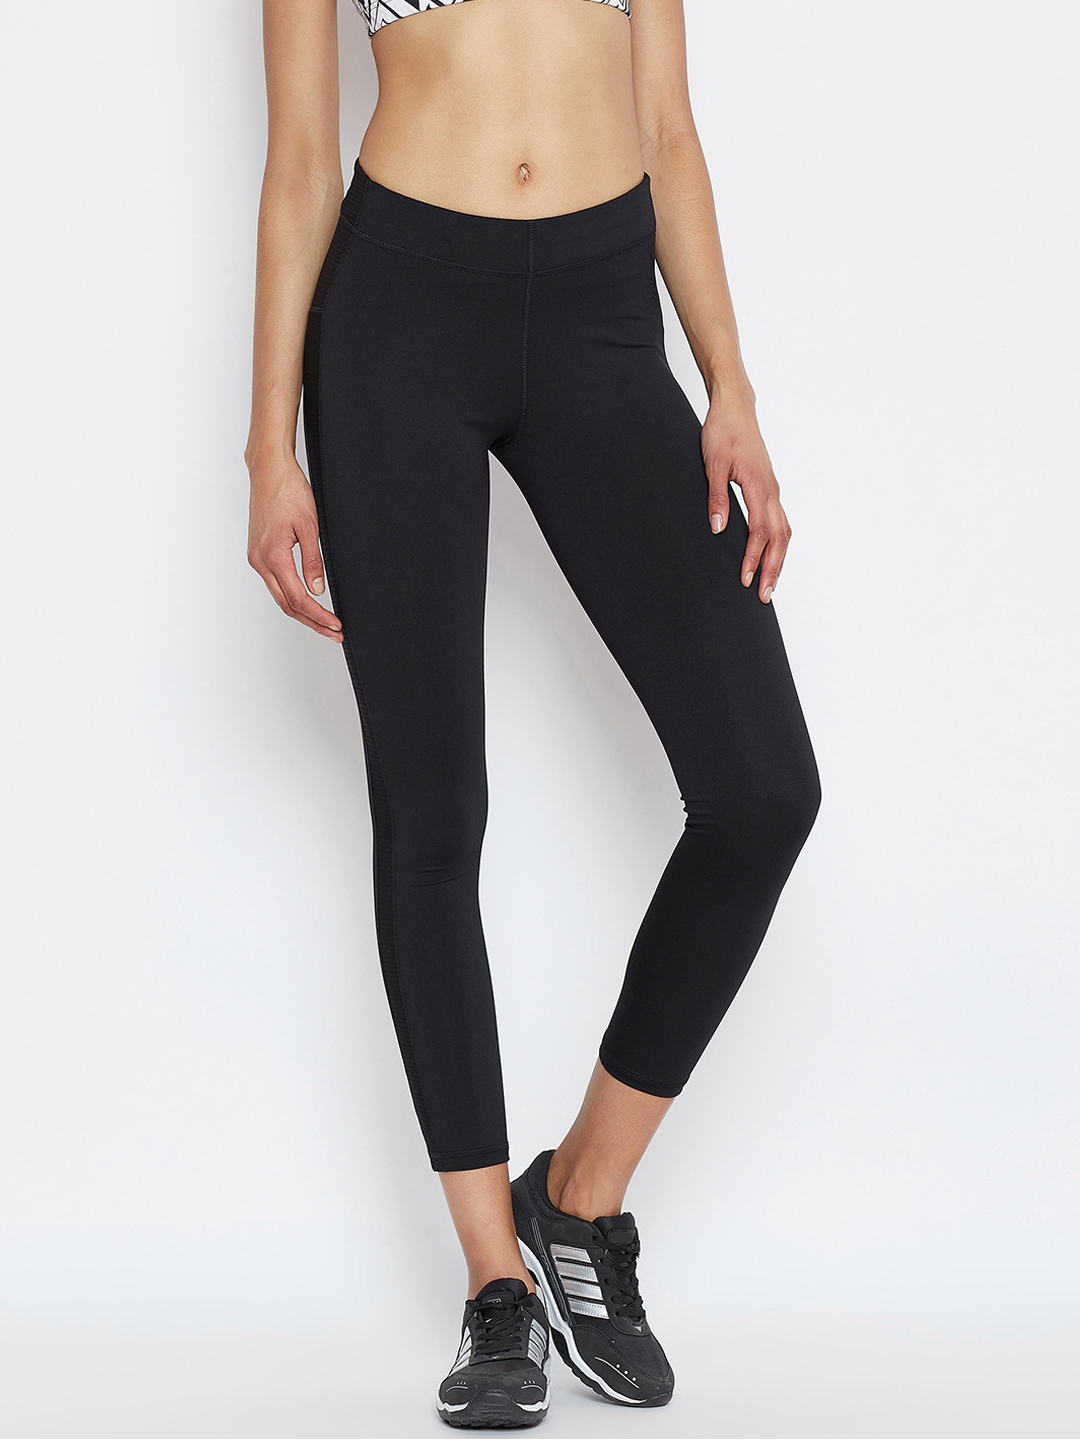 Buy JUMP USA Women Black Solid Tights - Tights for Women 9257491 | Myntra